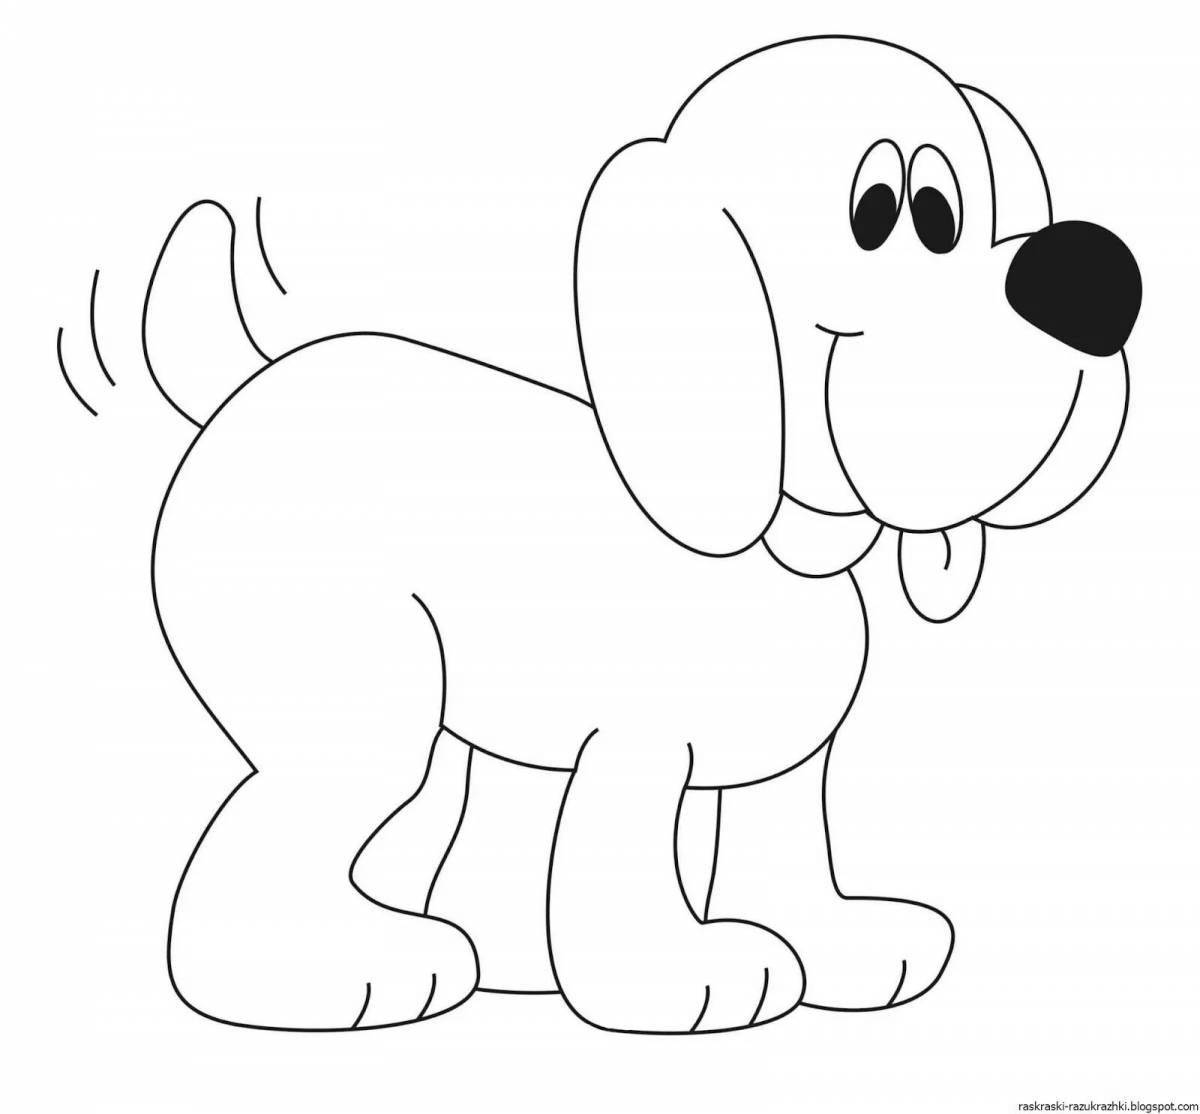 Amazing dog coloring book for 2-3 year olds